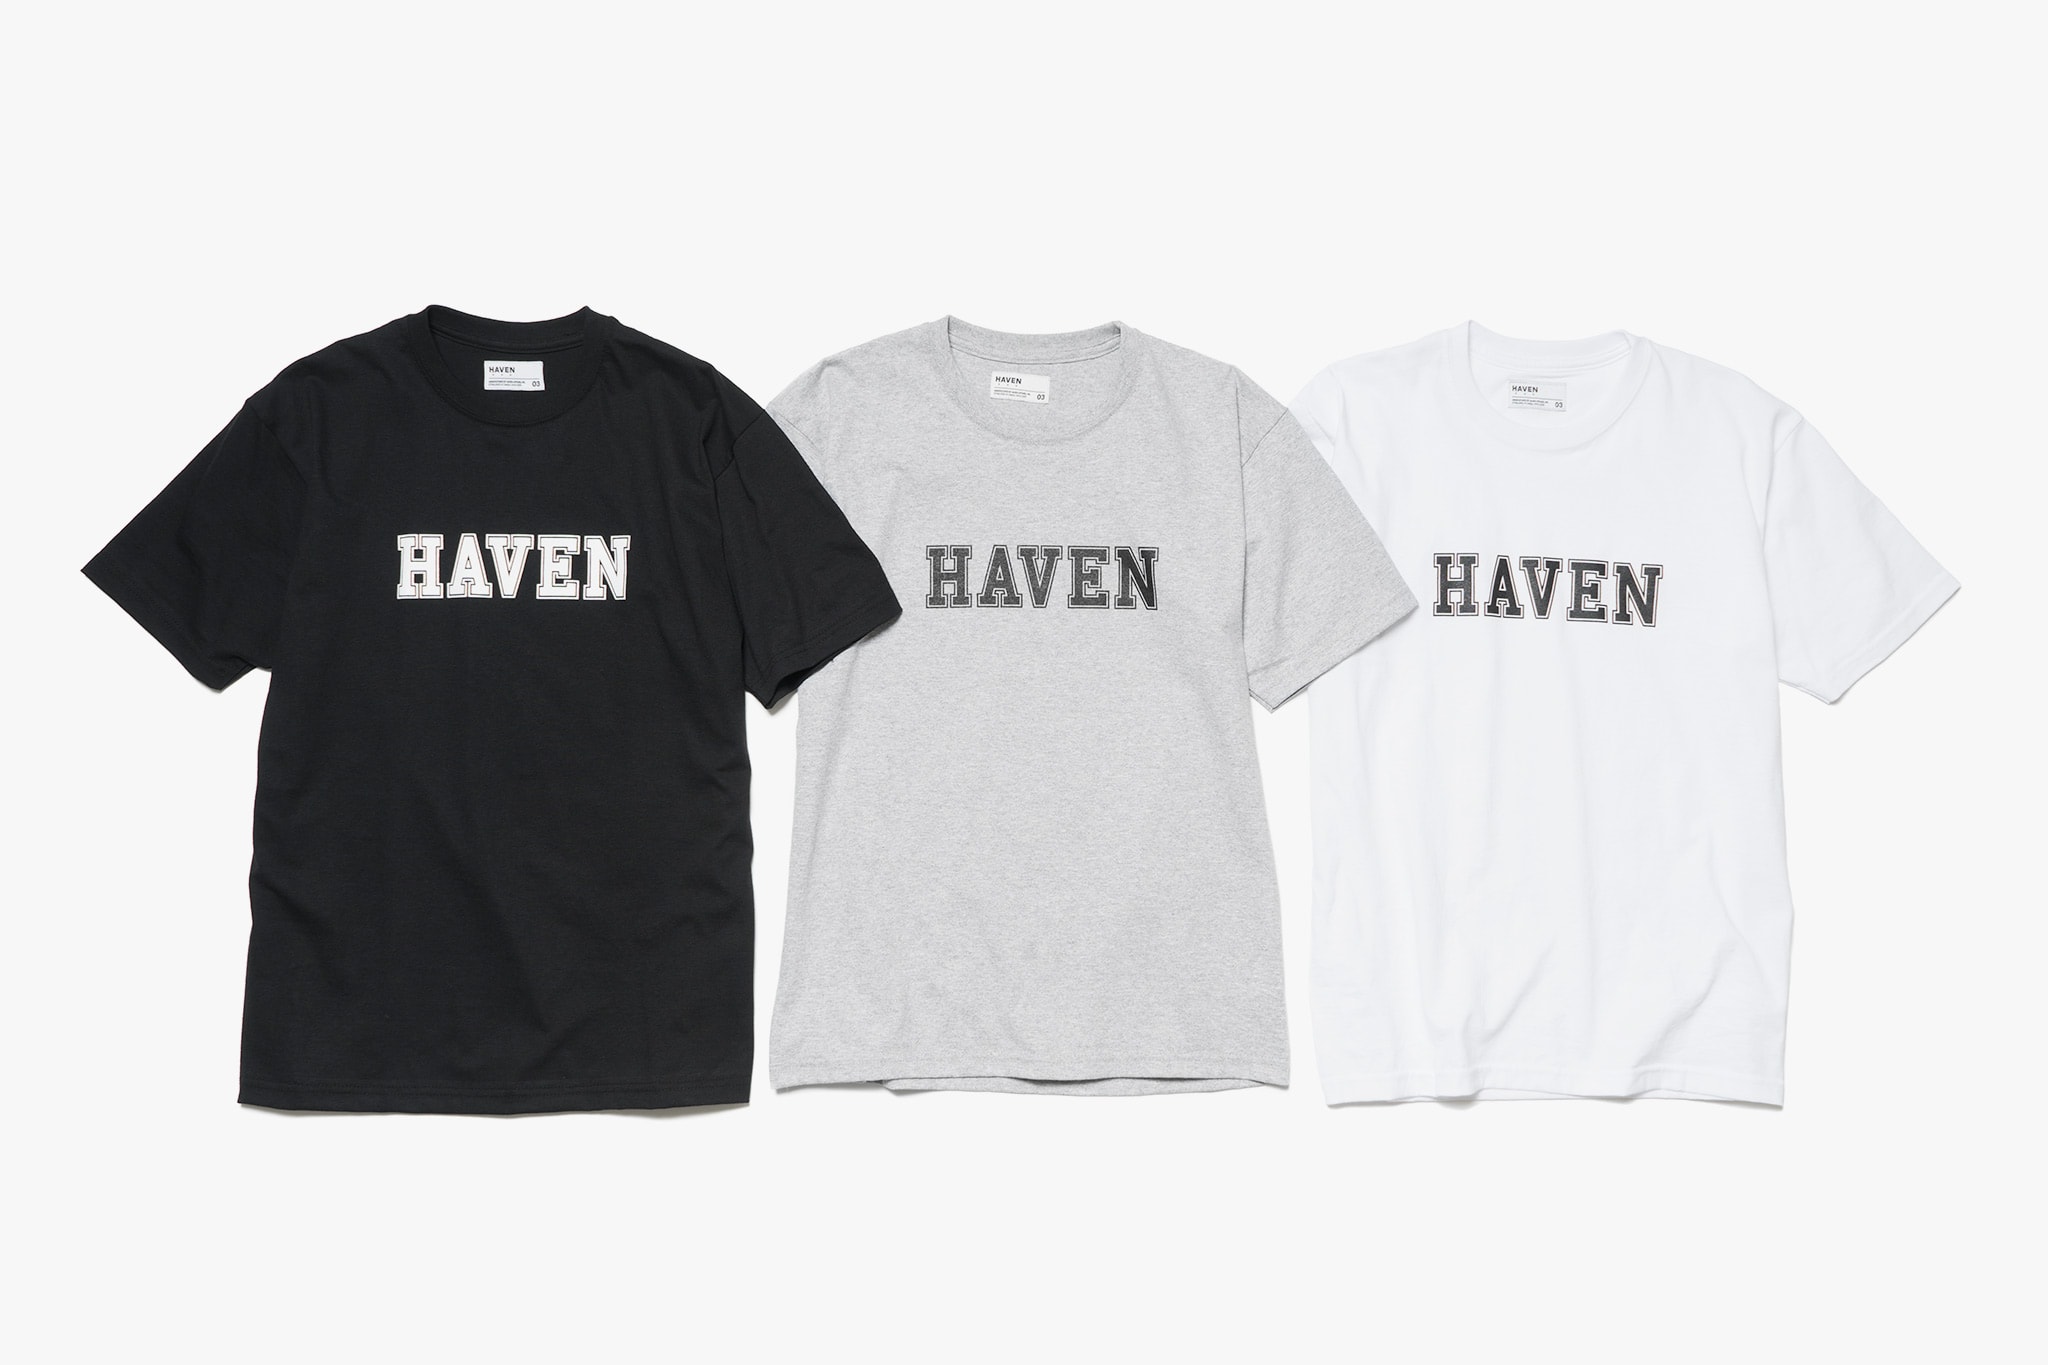 HAVEN's Delivery 2 Collection, Closer Look | Hypebeast